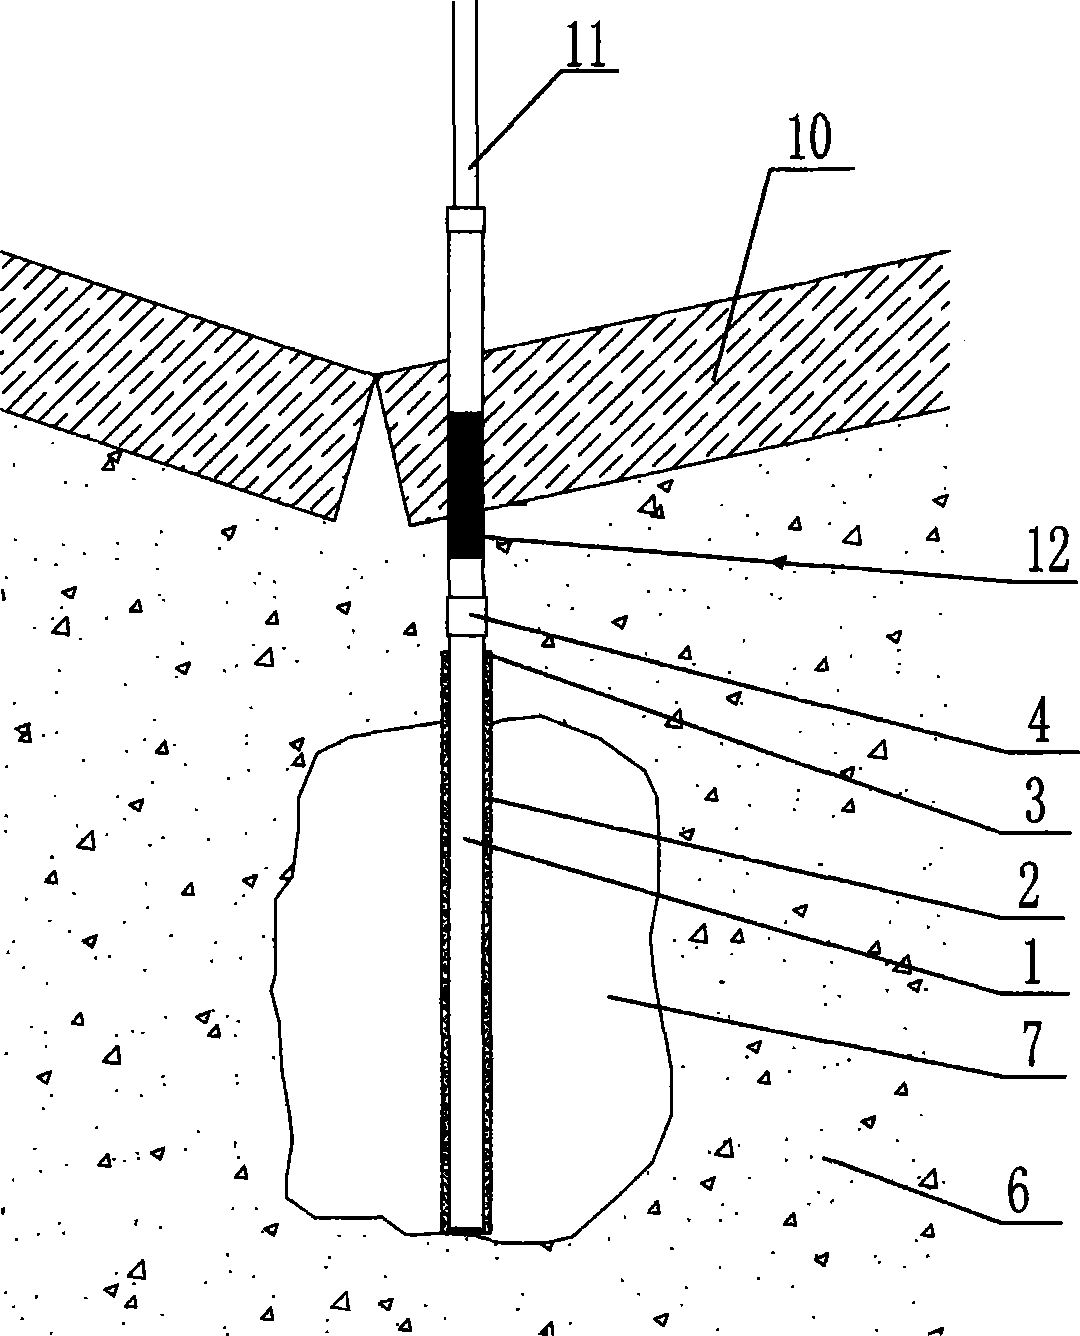 Expansive pouring device and method for governing railway roadbed sedimentation and deformation